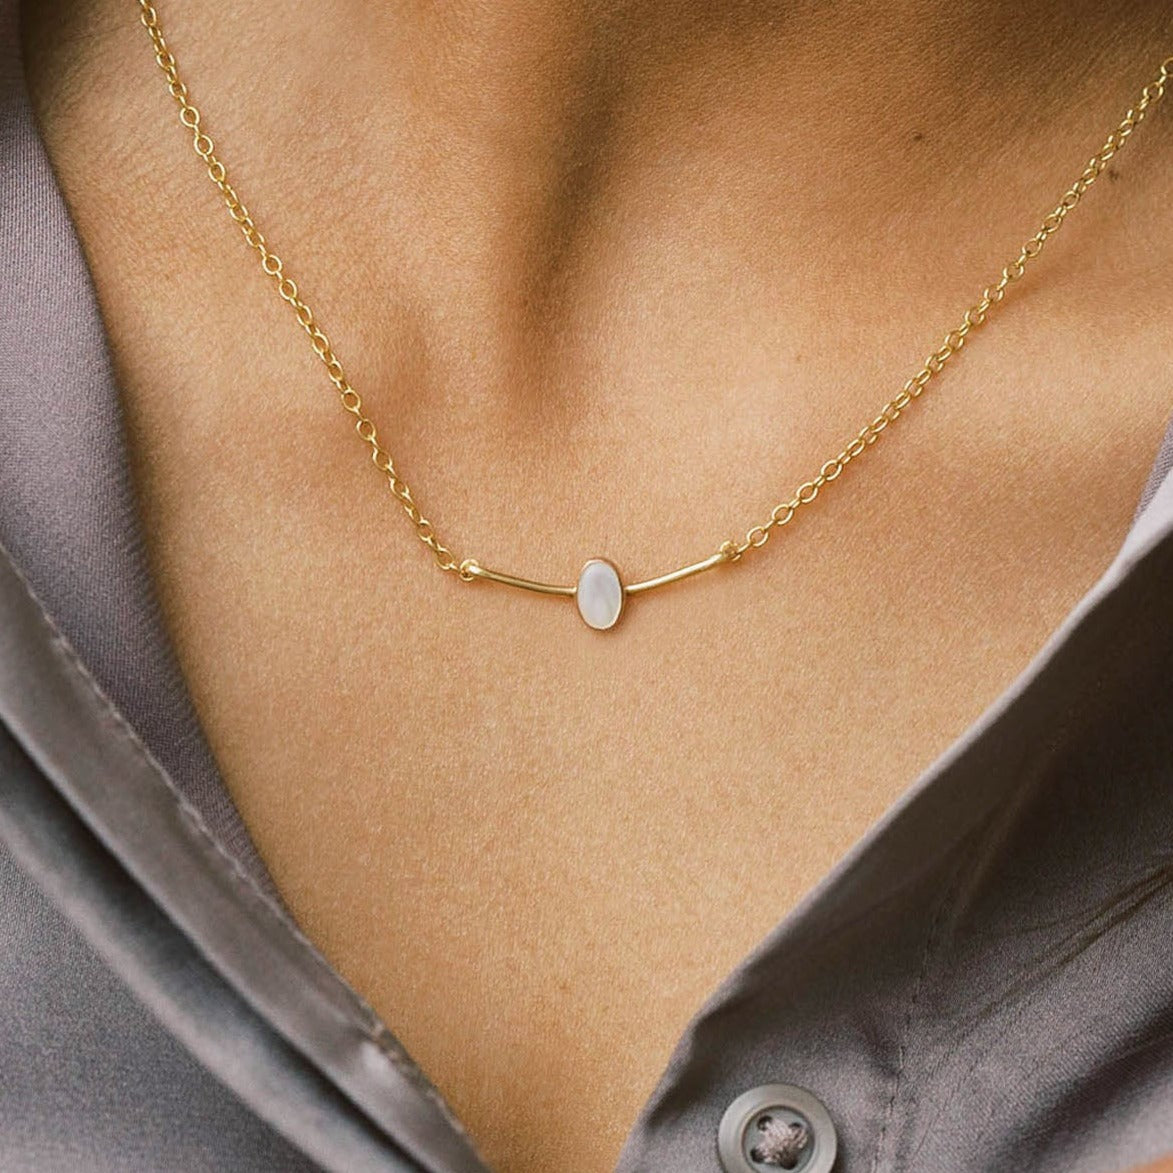 Small gold curved bar pendant with a pearl in the center.